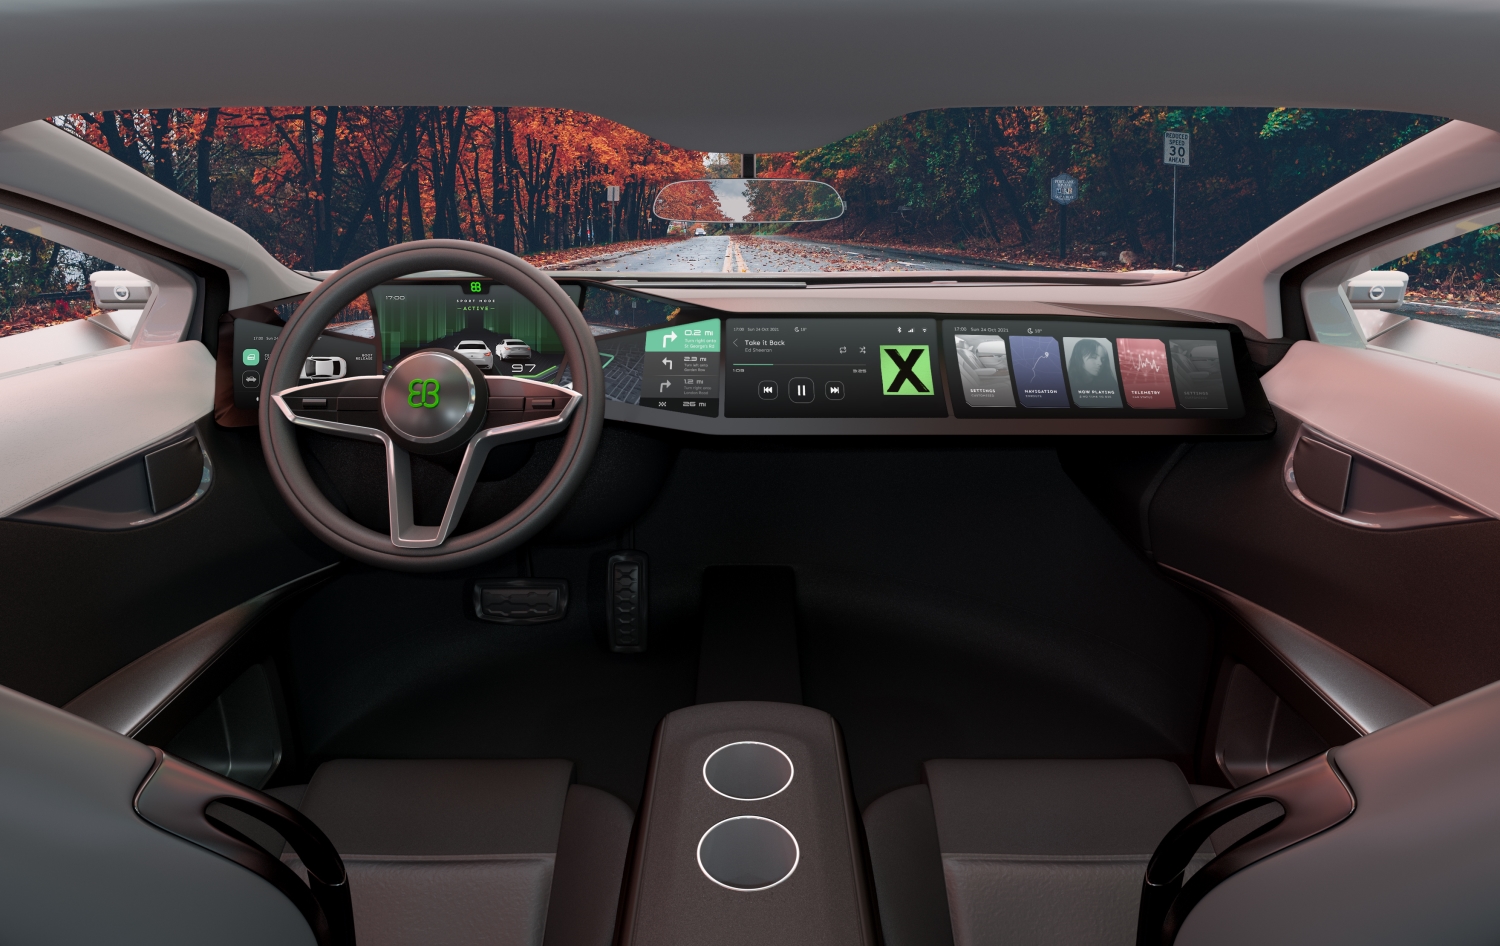 How to develop the automotive cockpit of the future